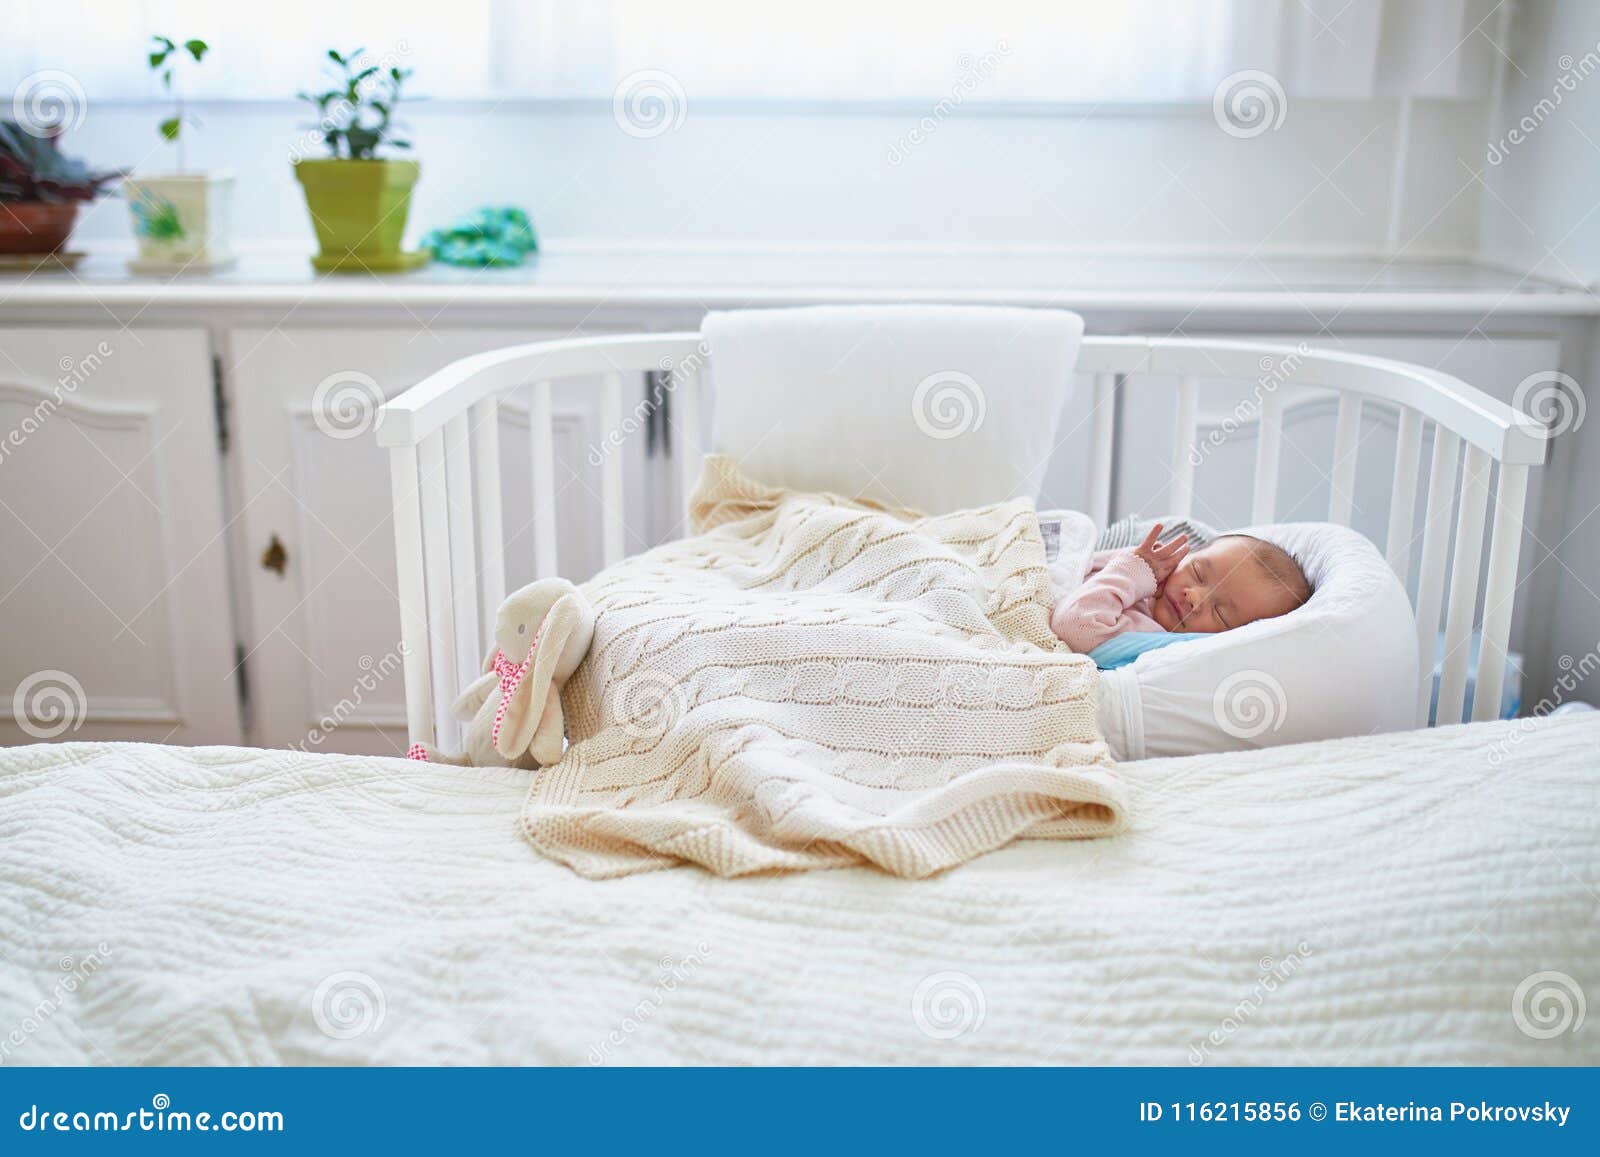 baby crib attached to parents bed